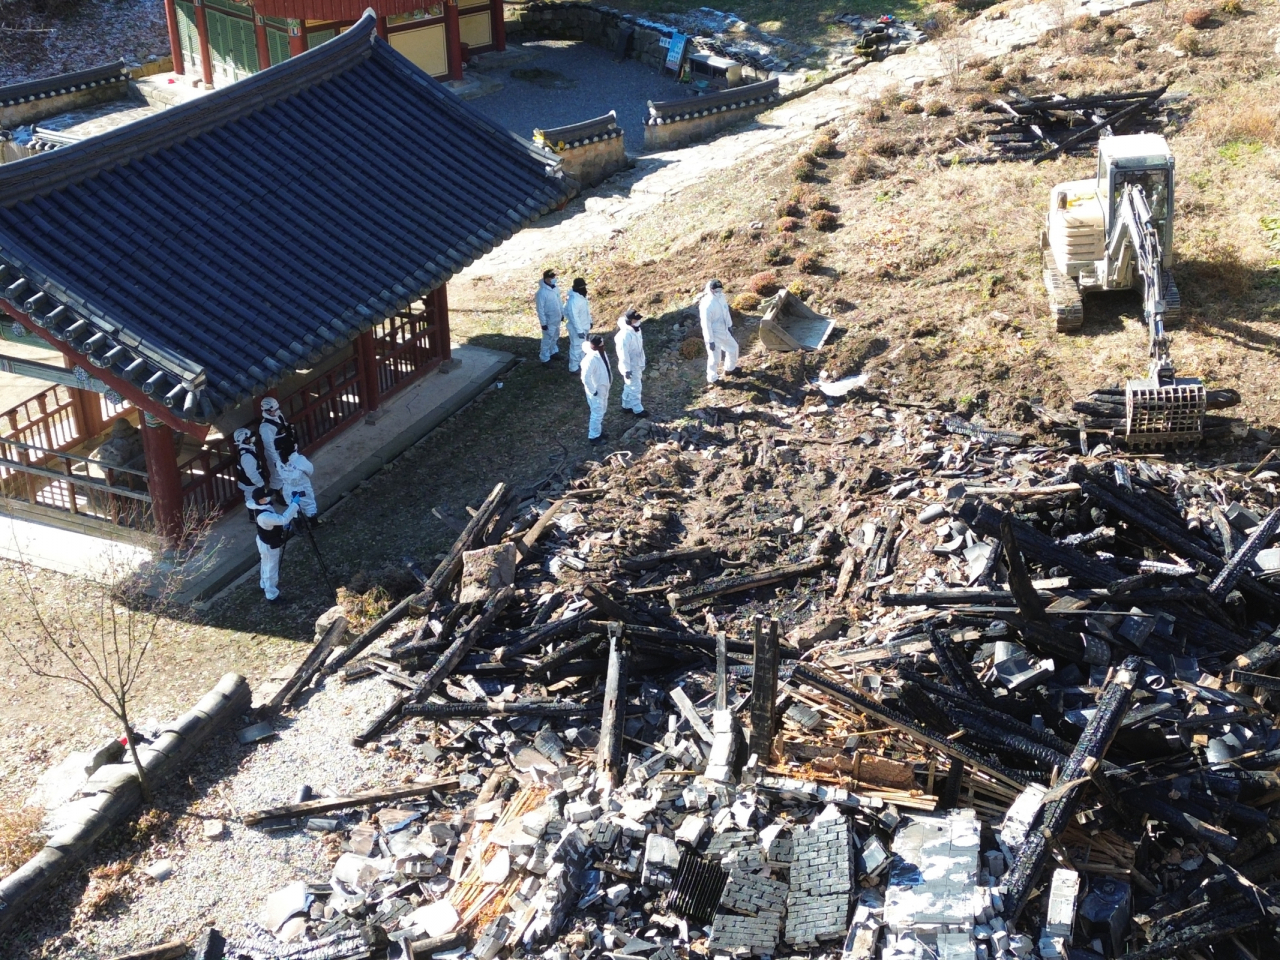 Investigators from the National Forensic Service examine the site of a fire at a dormitory for Buddhist monks at Chiljangsa in Anseong, Gyeonggi Province, Thursday. (Yonhap)